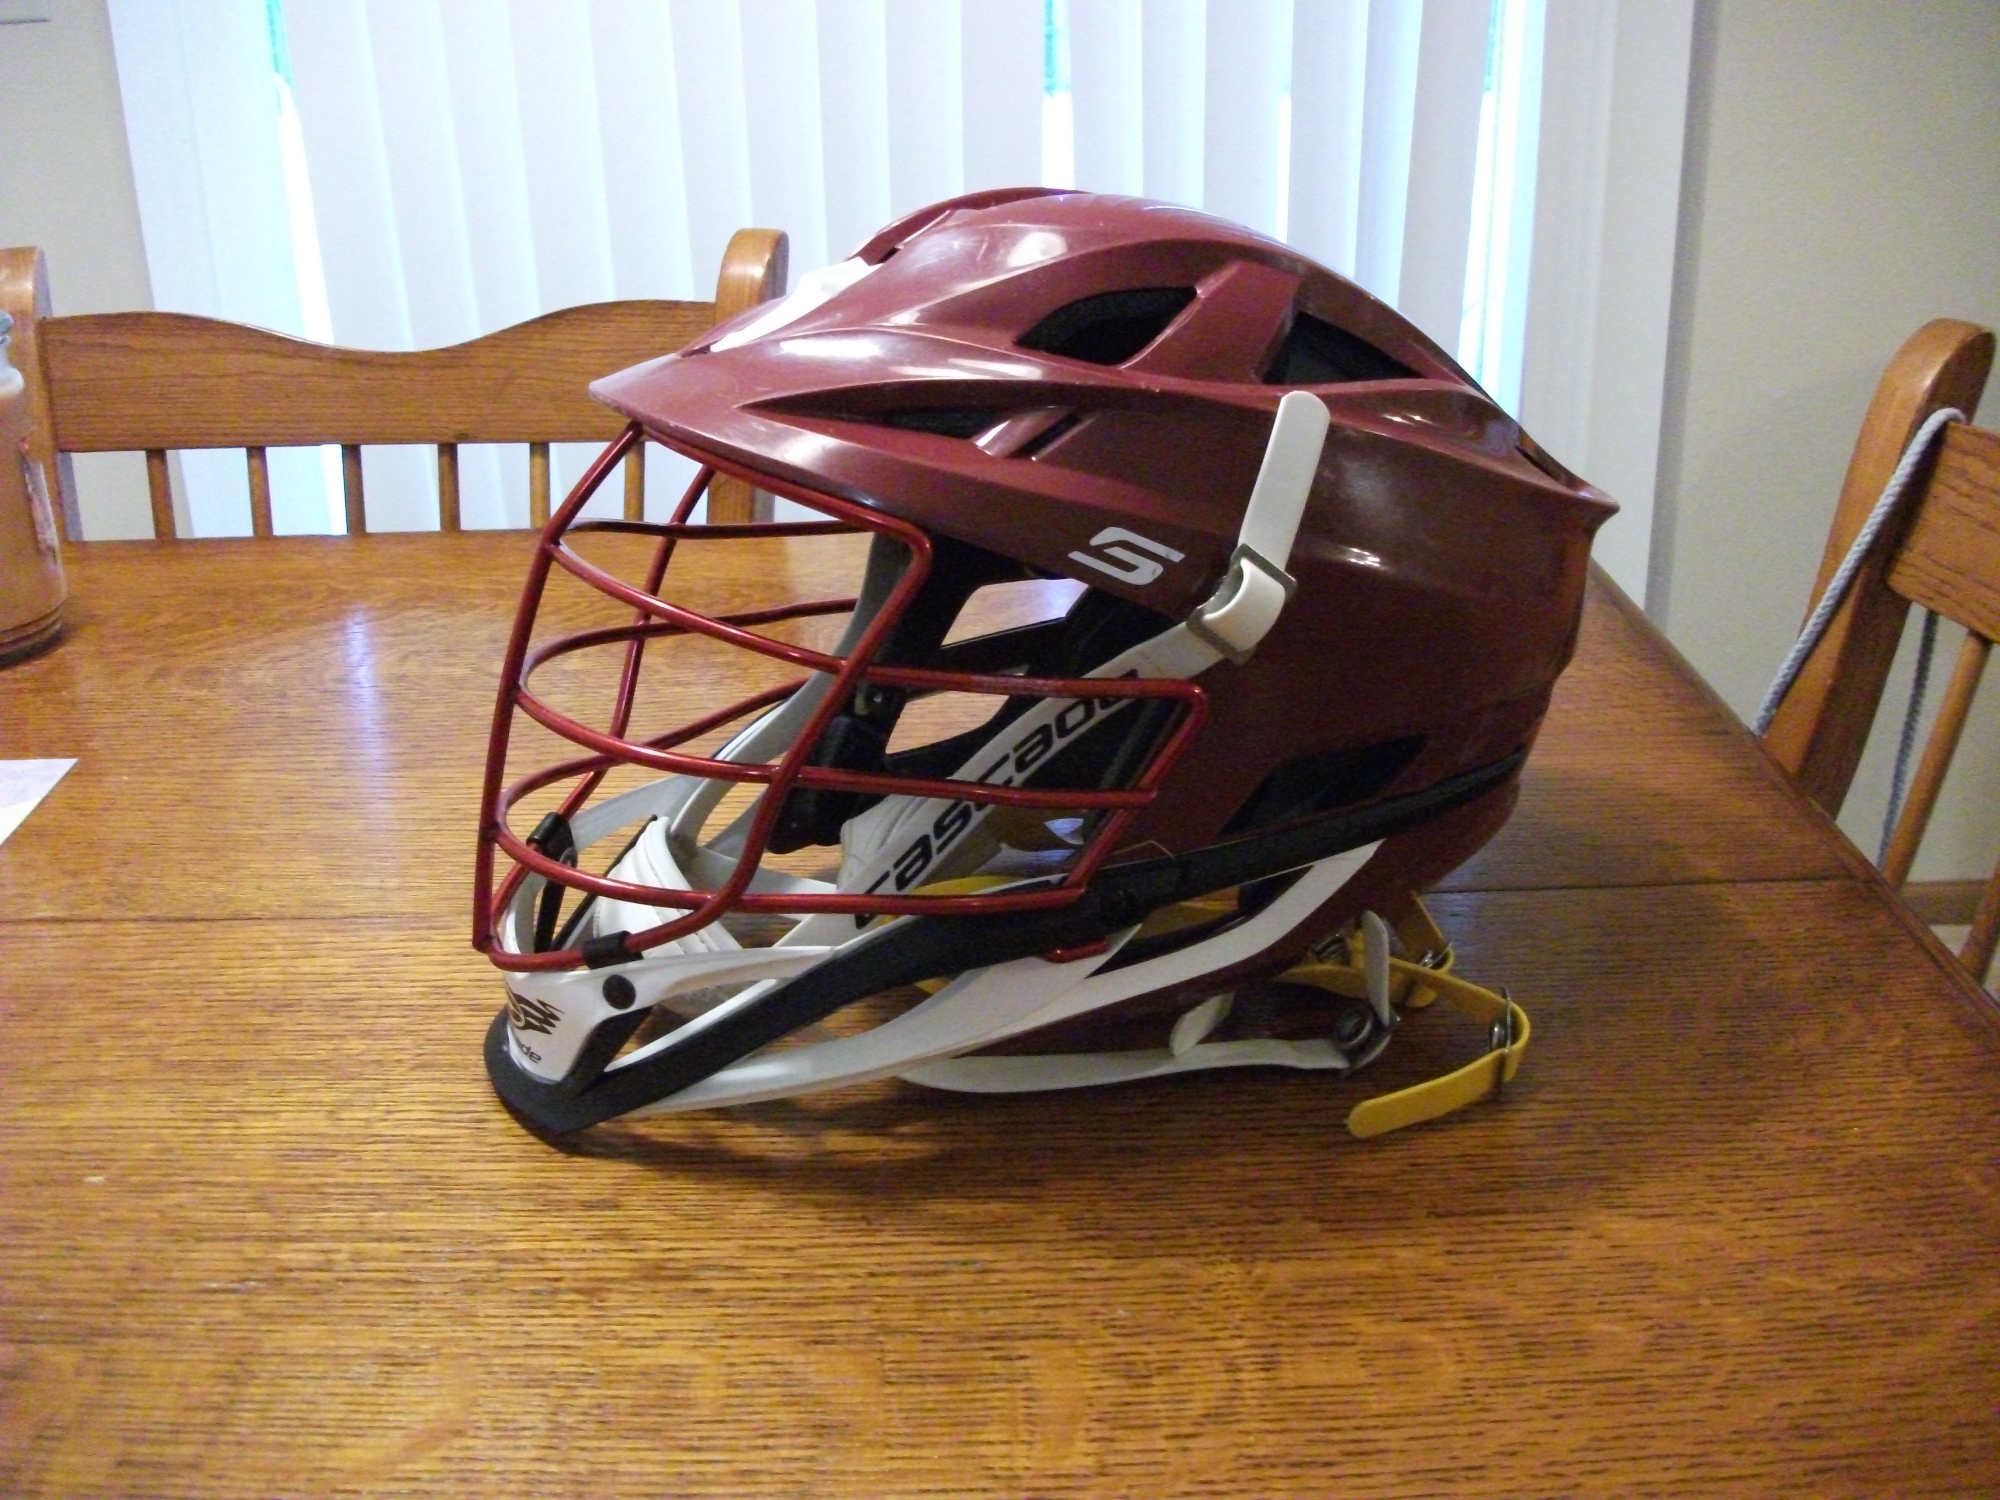 Used Cascade S Helmet - Maroon with Red Mask and White Chin